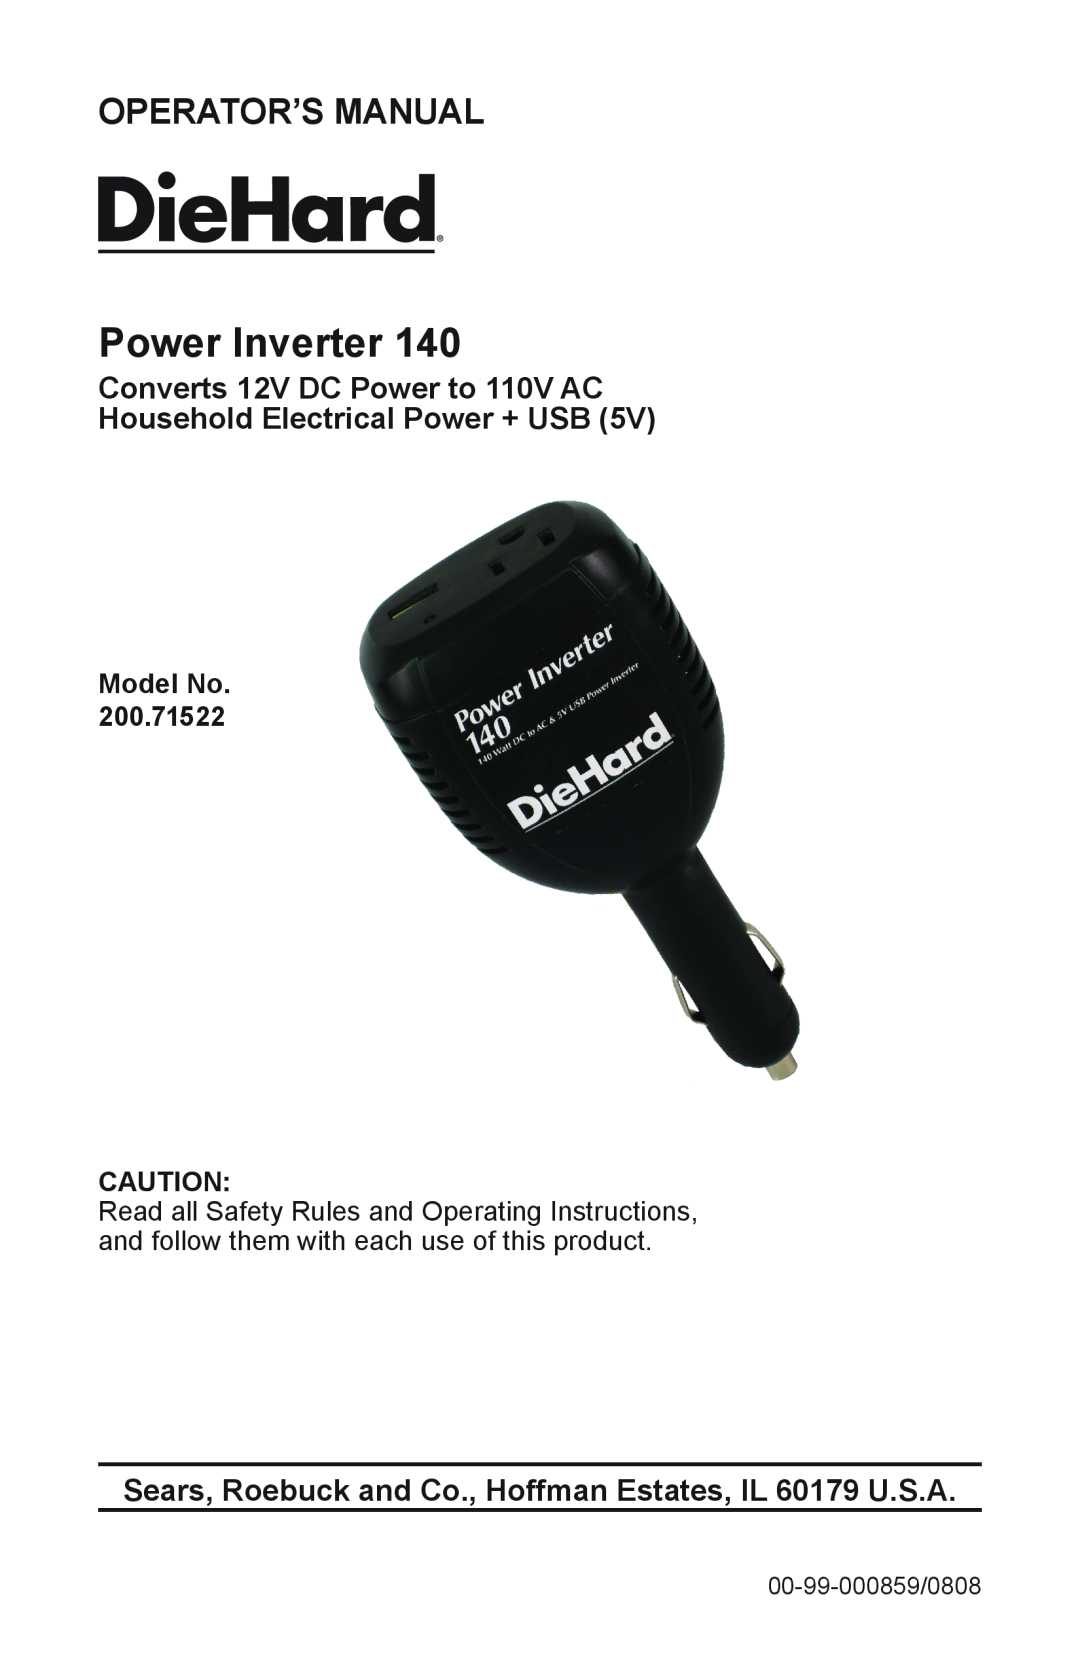 Sears 200.71522 operating instructions Converts 12V DC Power to 110V AC Household Electrical Power + USB, Power Inverter 